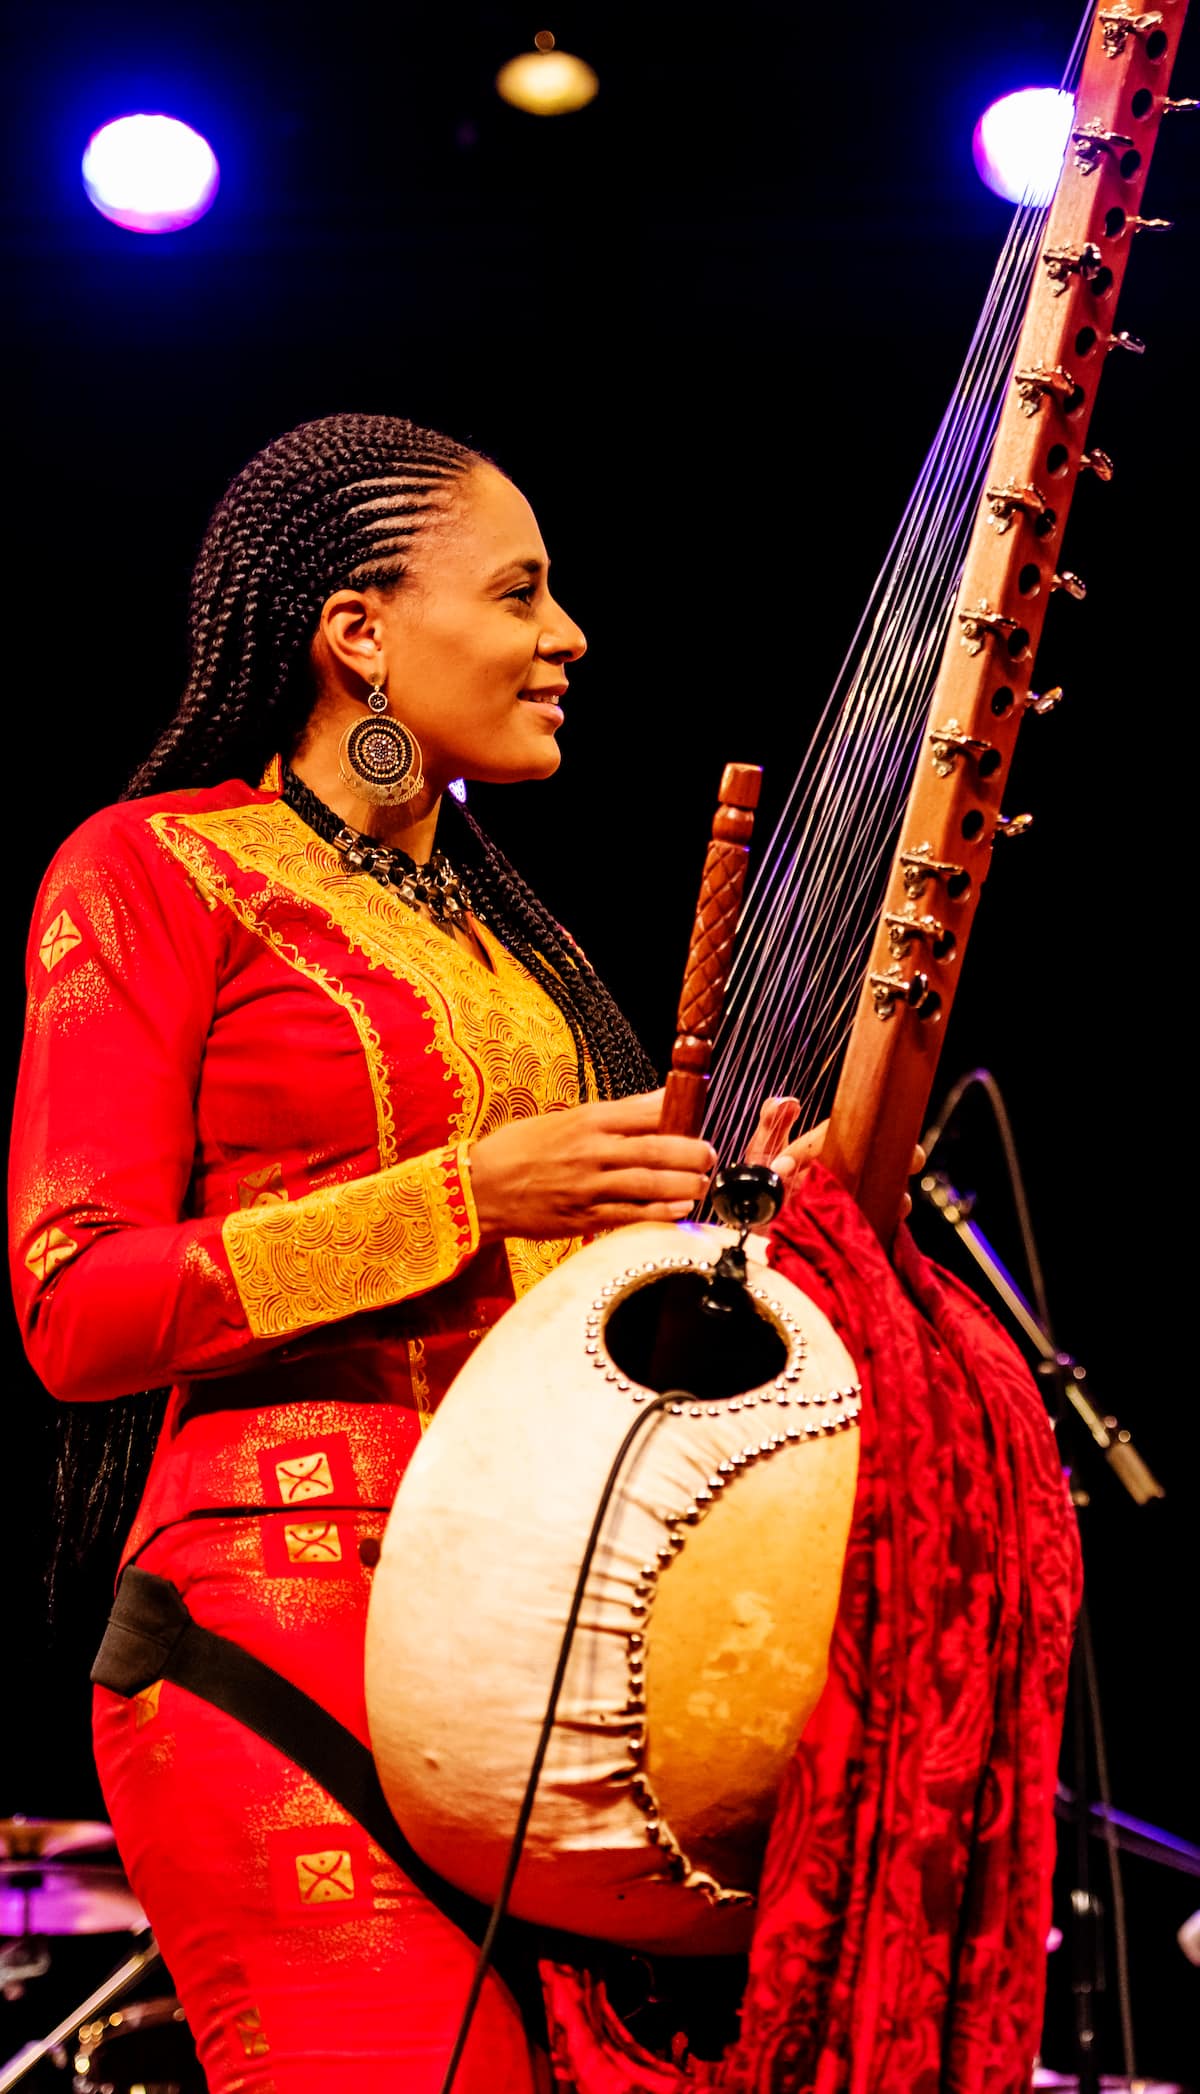 List Of African Musical Instruments And Their Names And Pictures